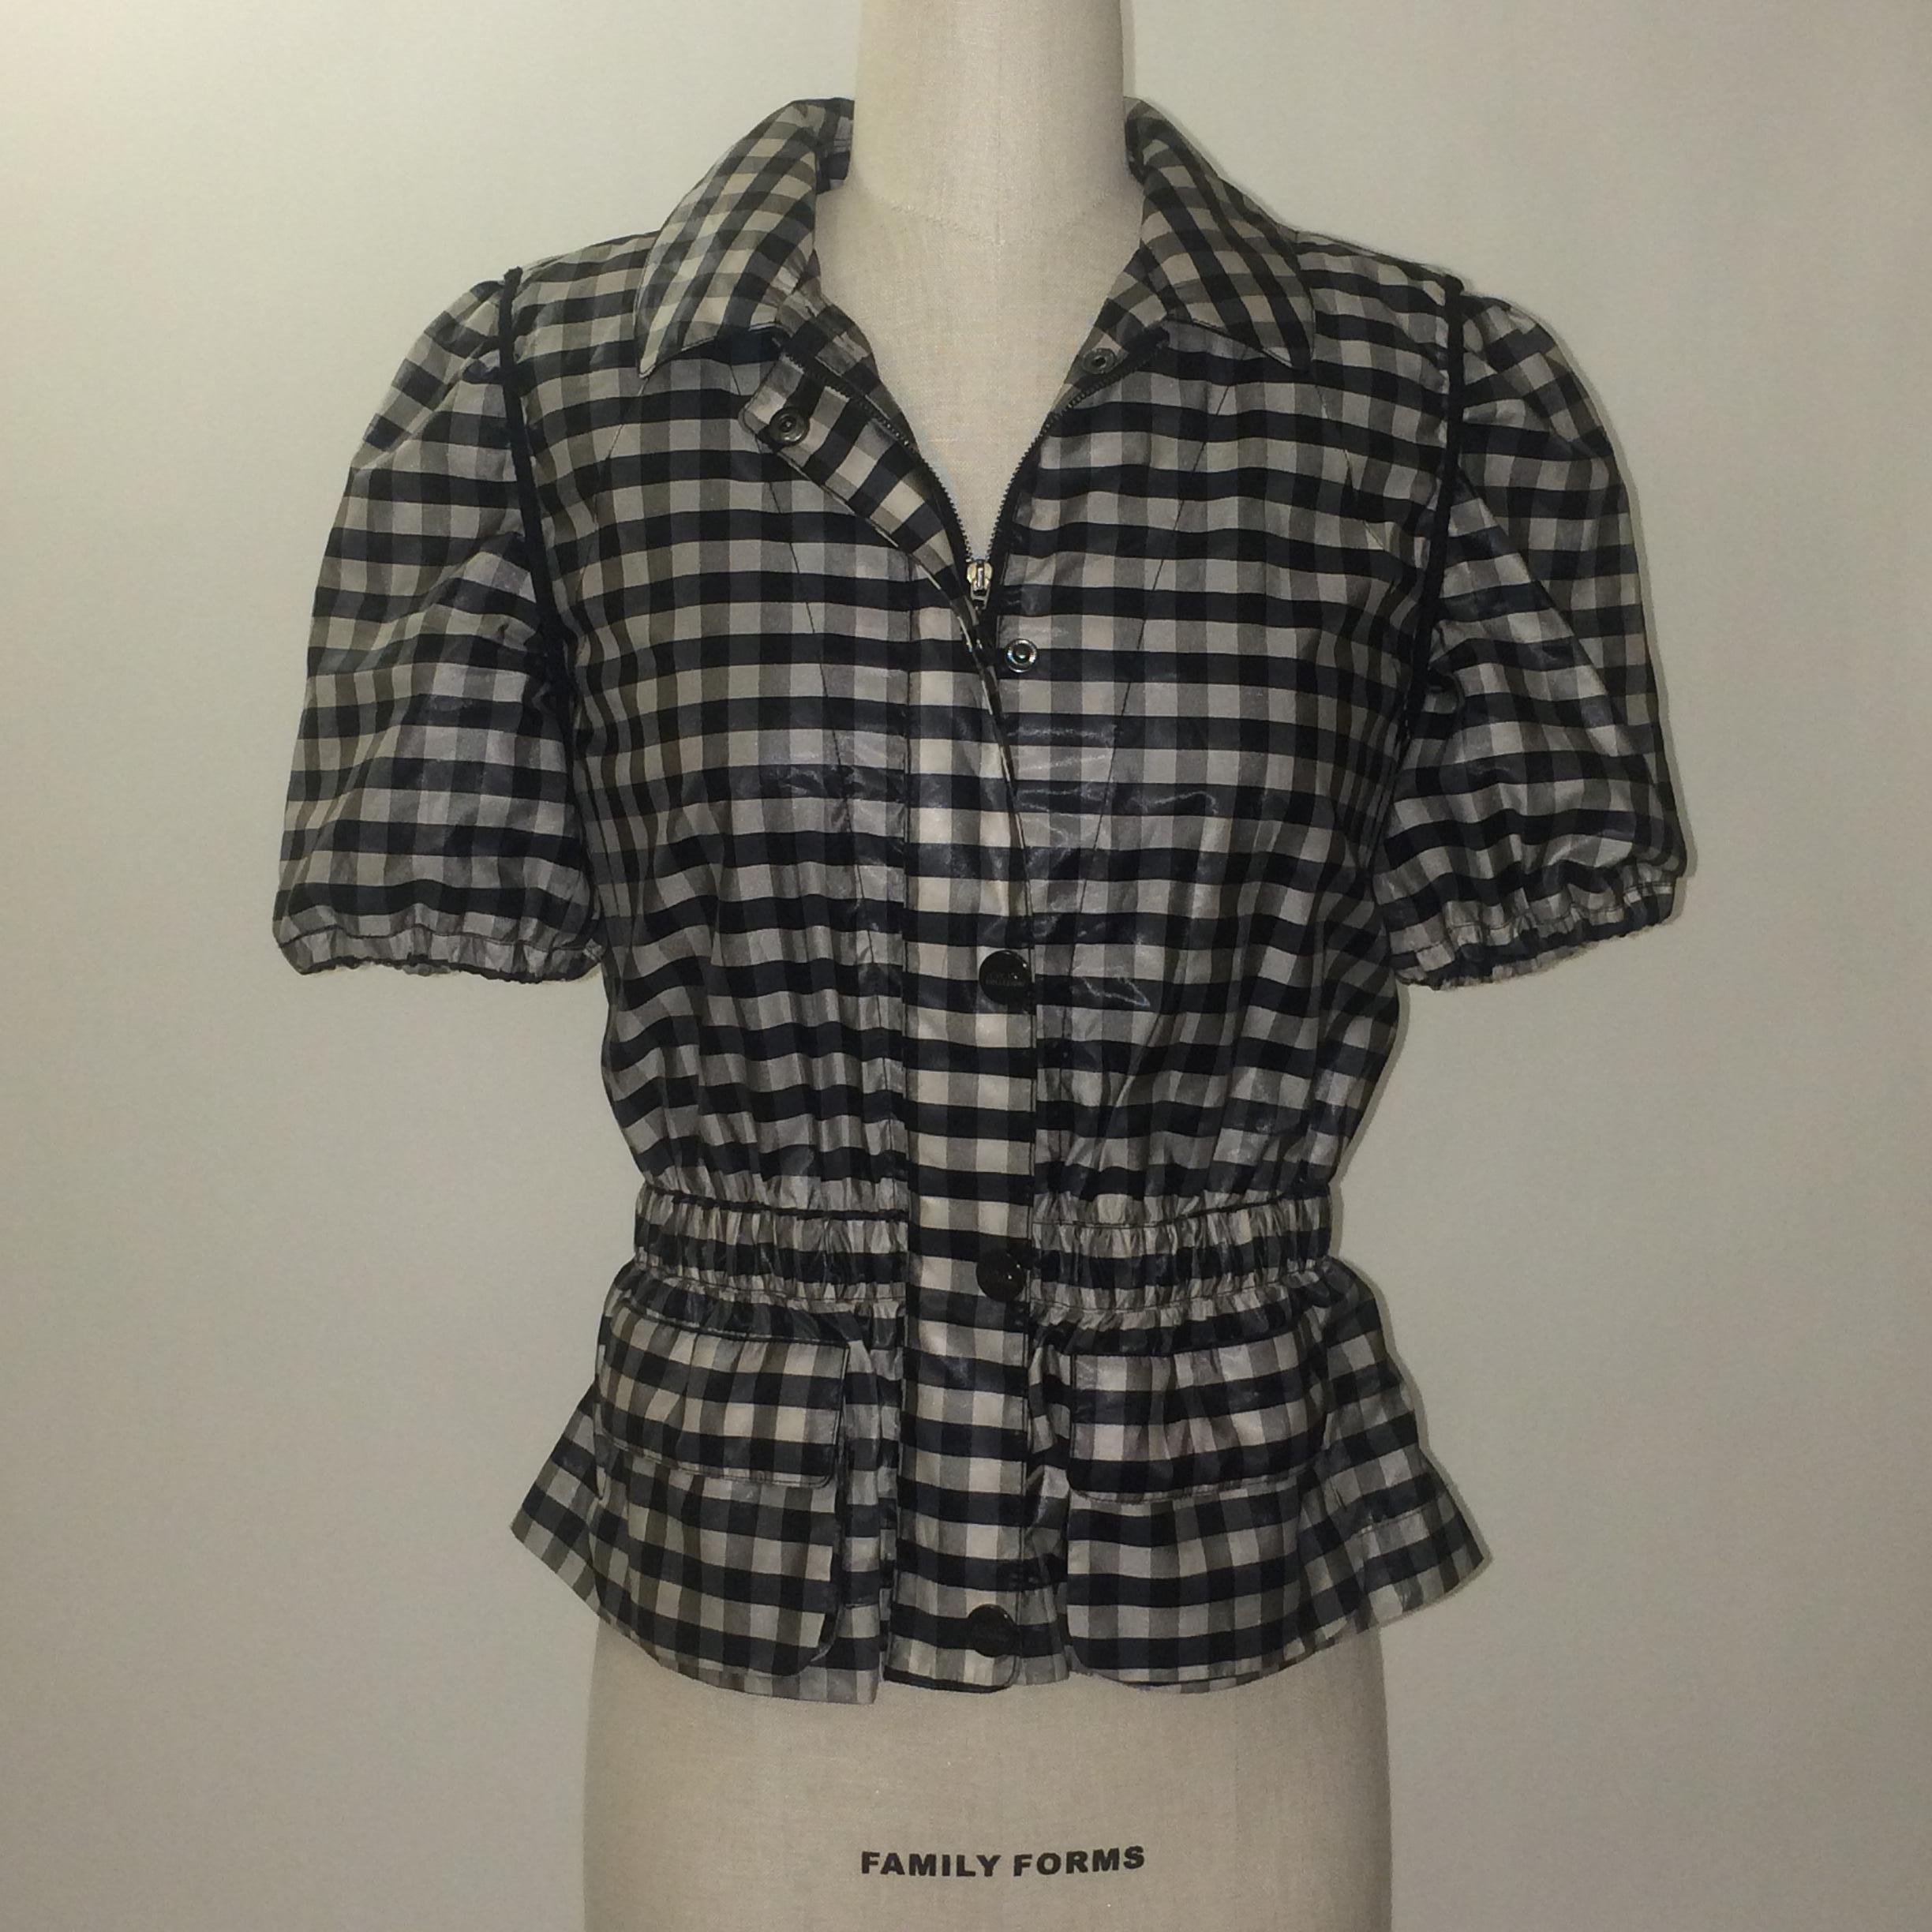 Armani Collezioni by Giorgio Armani short sleeved jacket in a very pale grey and black checked pattern. Elastic at hem of short sleeves. Zips and snaps up front with adjustable hidden elastic at waist. Patch pockets at front bottom. Signed 'Armani